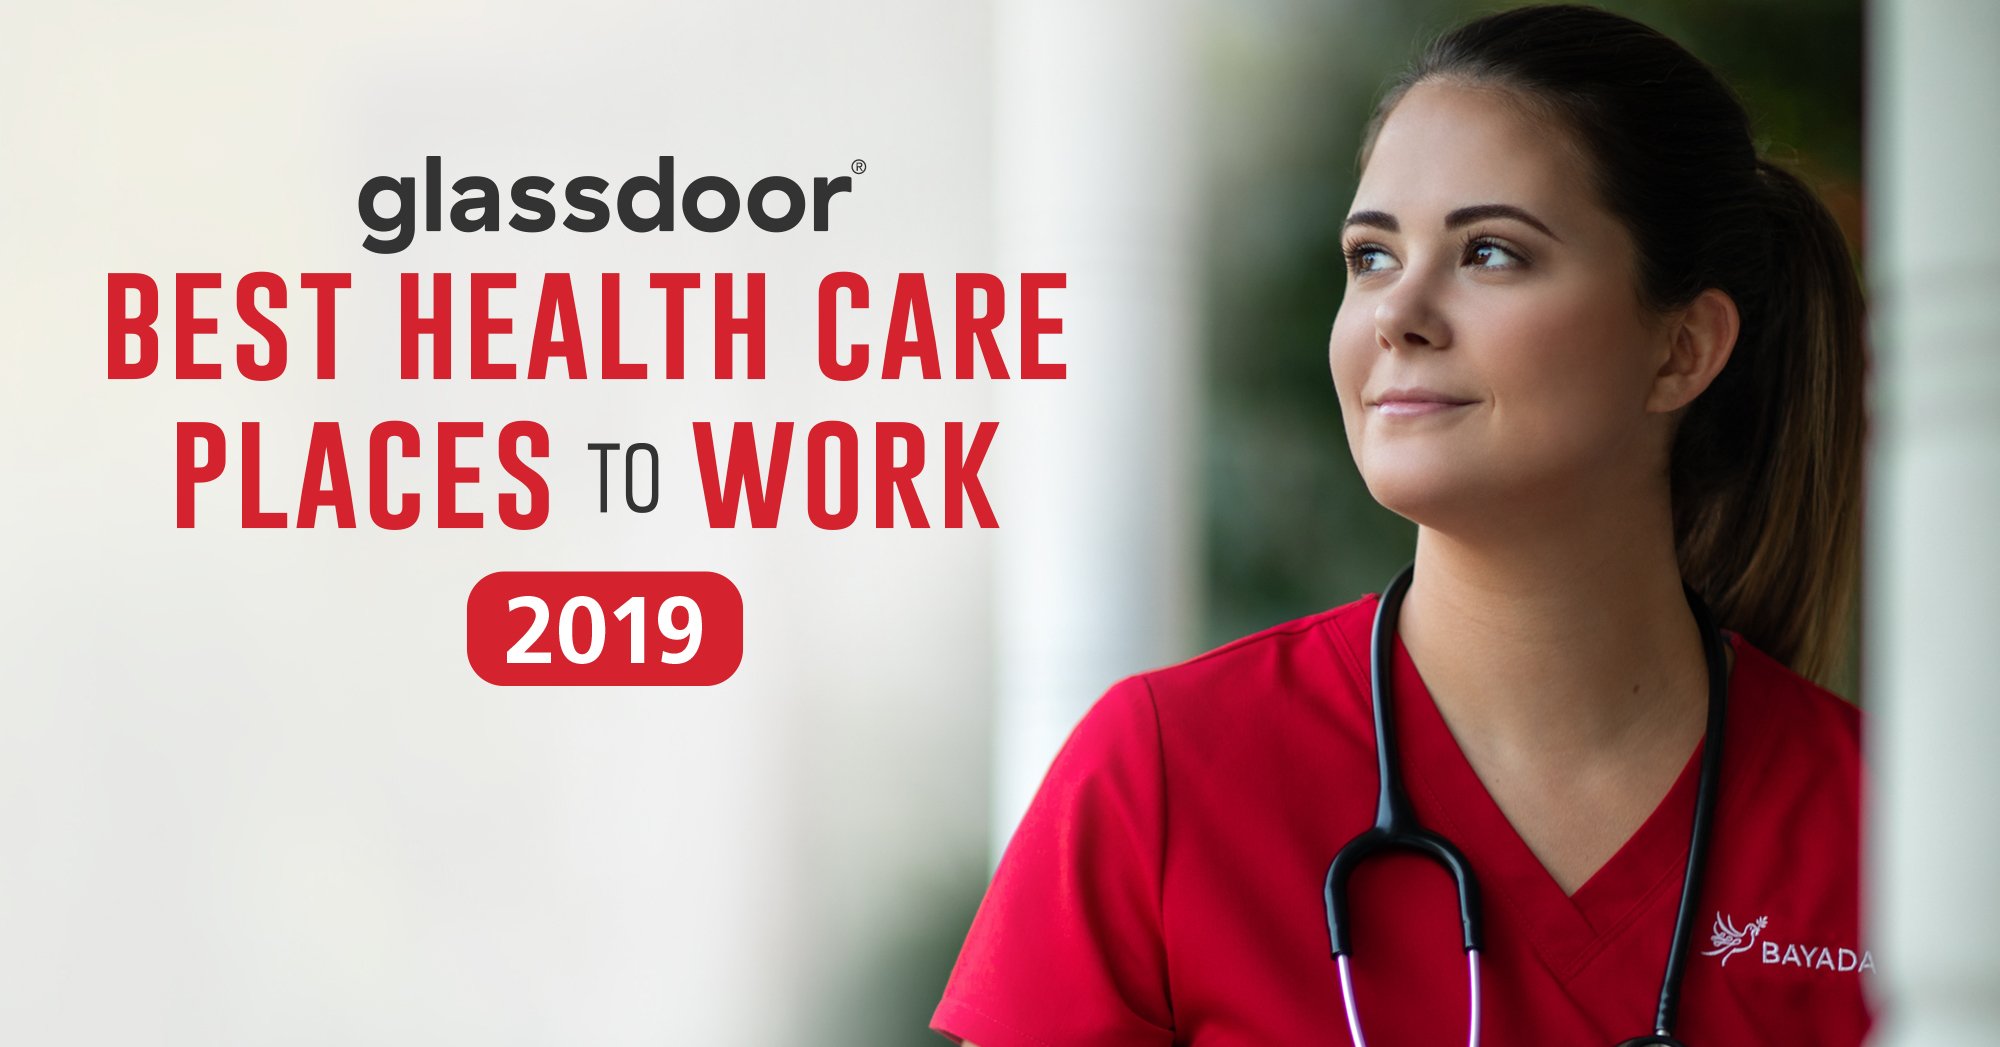 Bayada Home Health Care Named A Top Health Care Employer In 2019